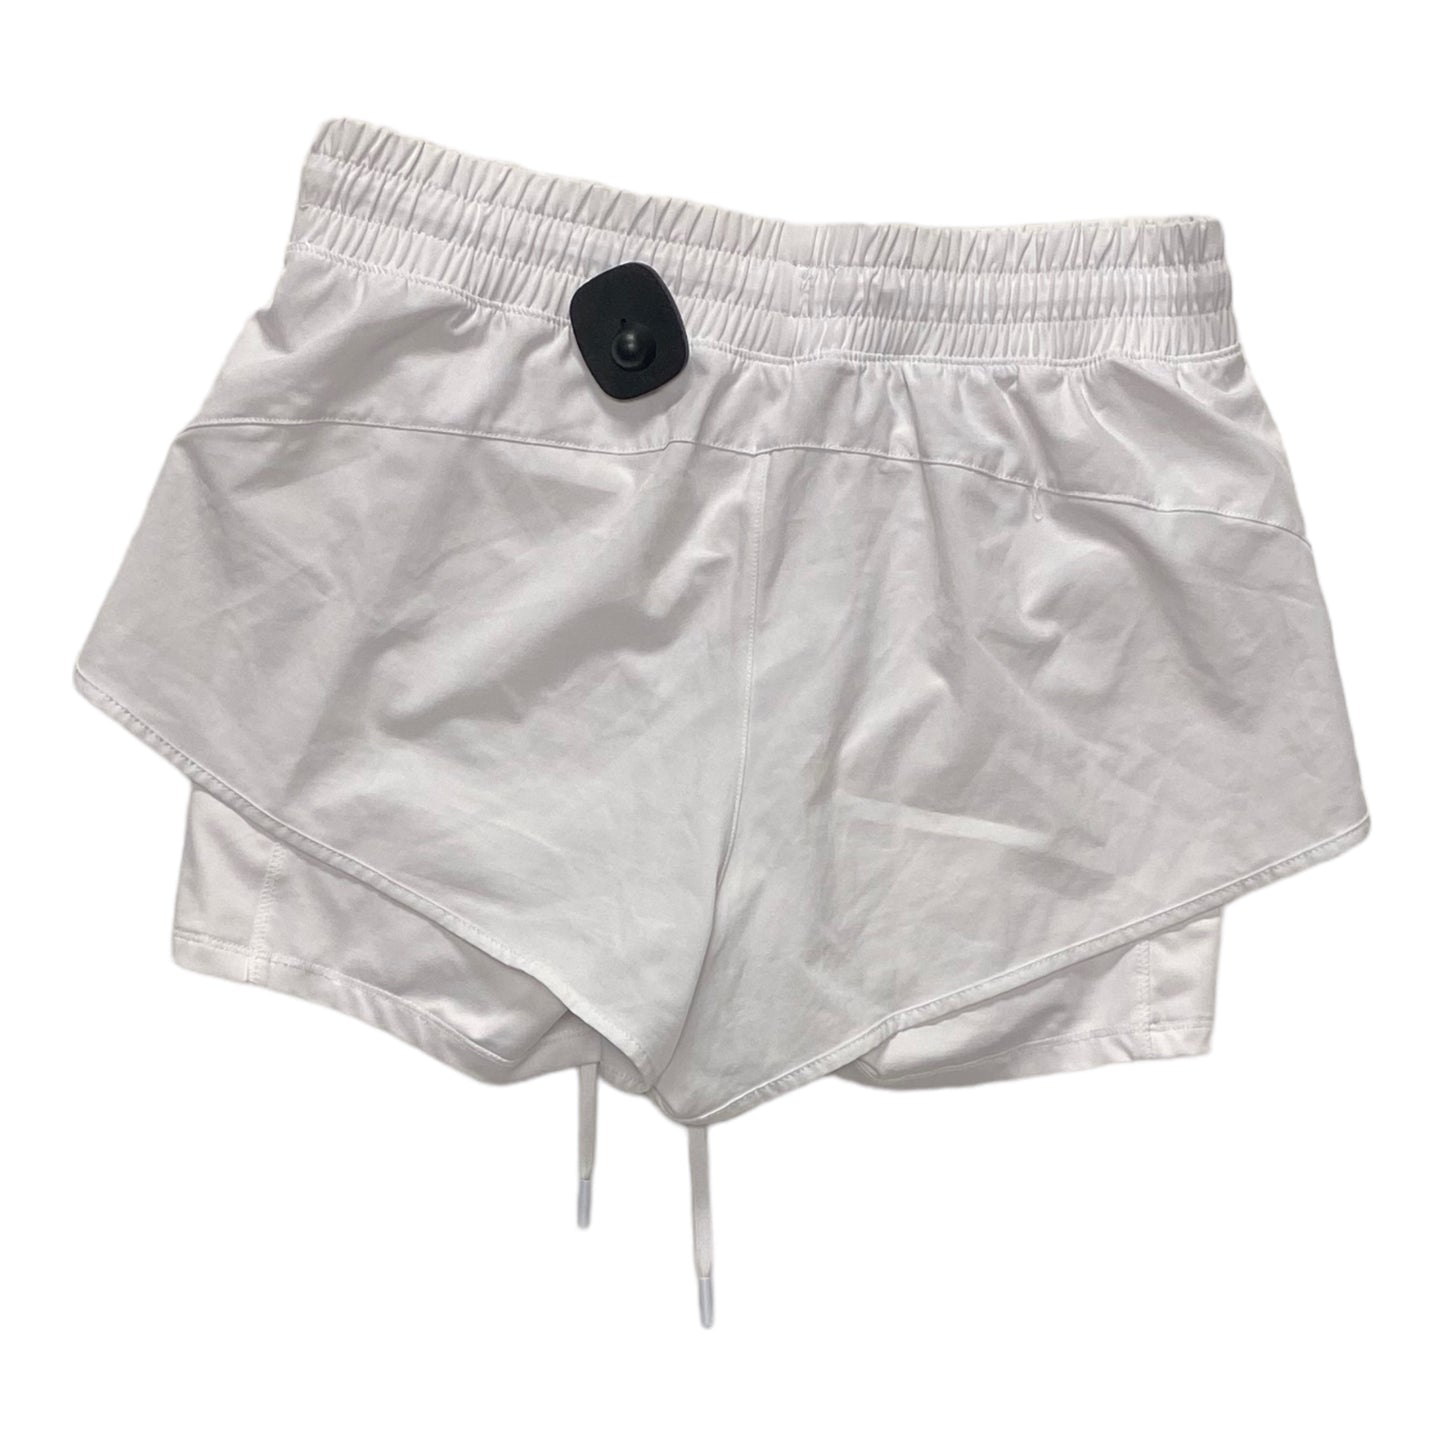 Athletic Shorts By 90 Degrees By Reflex  Size: S